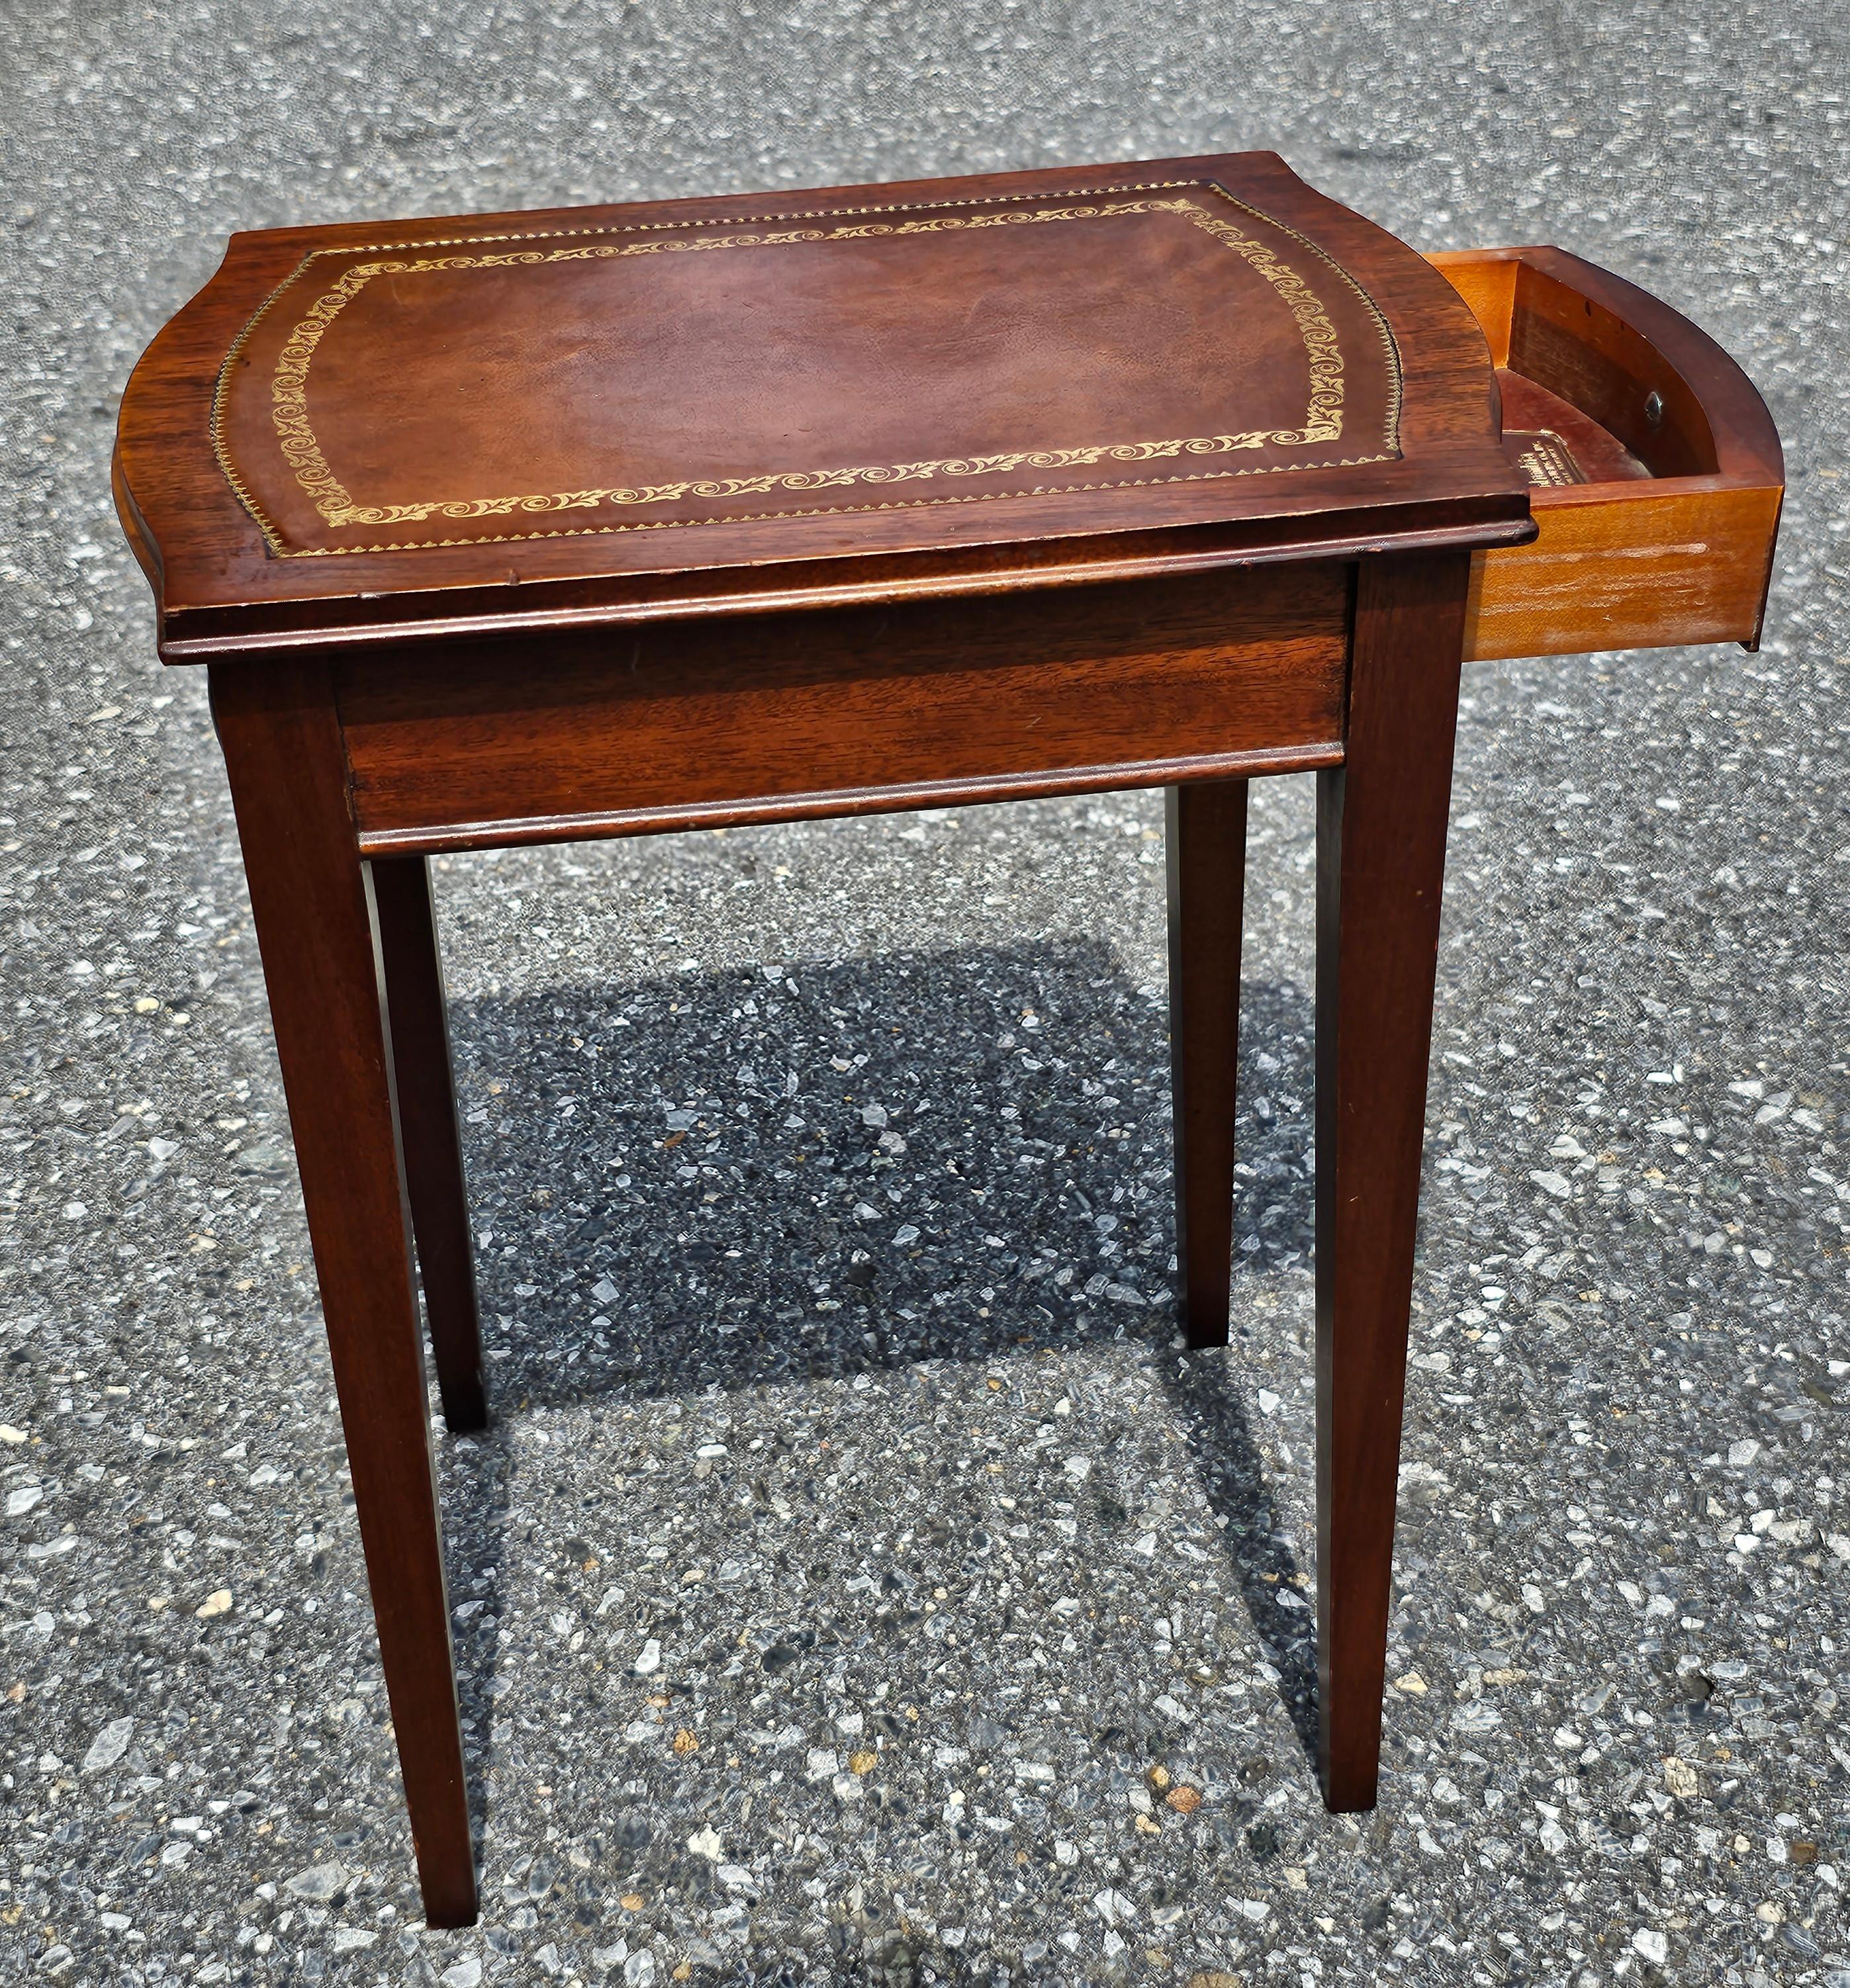 An exquisite Columbia Manufacturing Genuine Mahogany with Inlay  and Tooled Leather Candle Stand. 